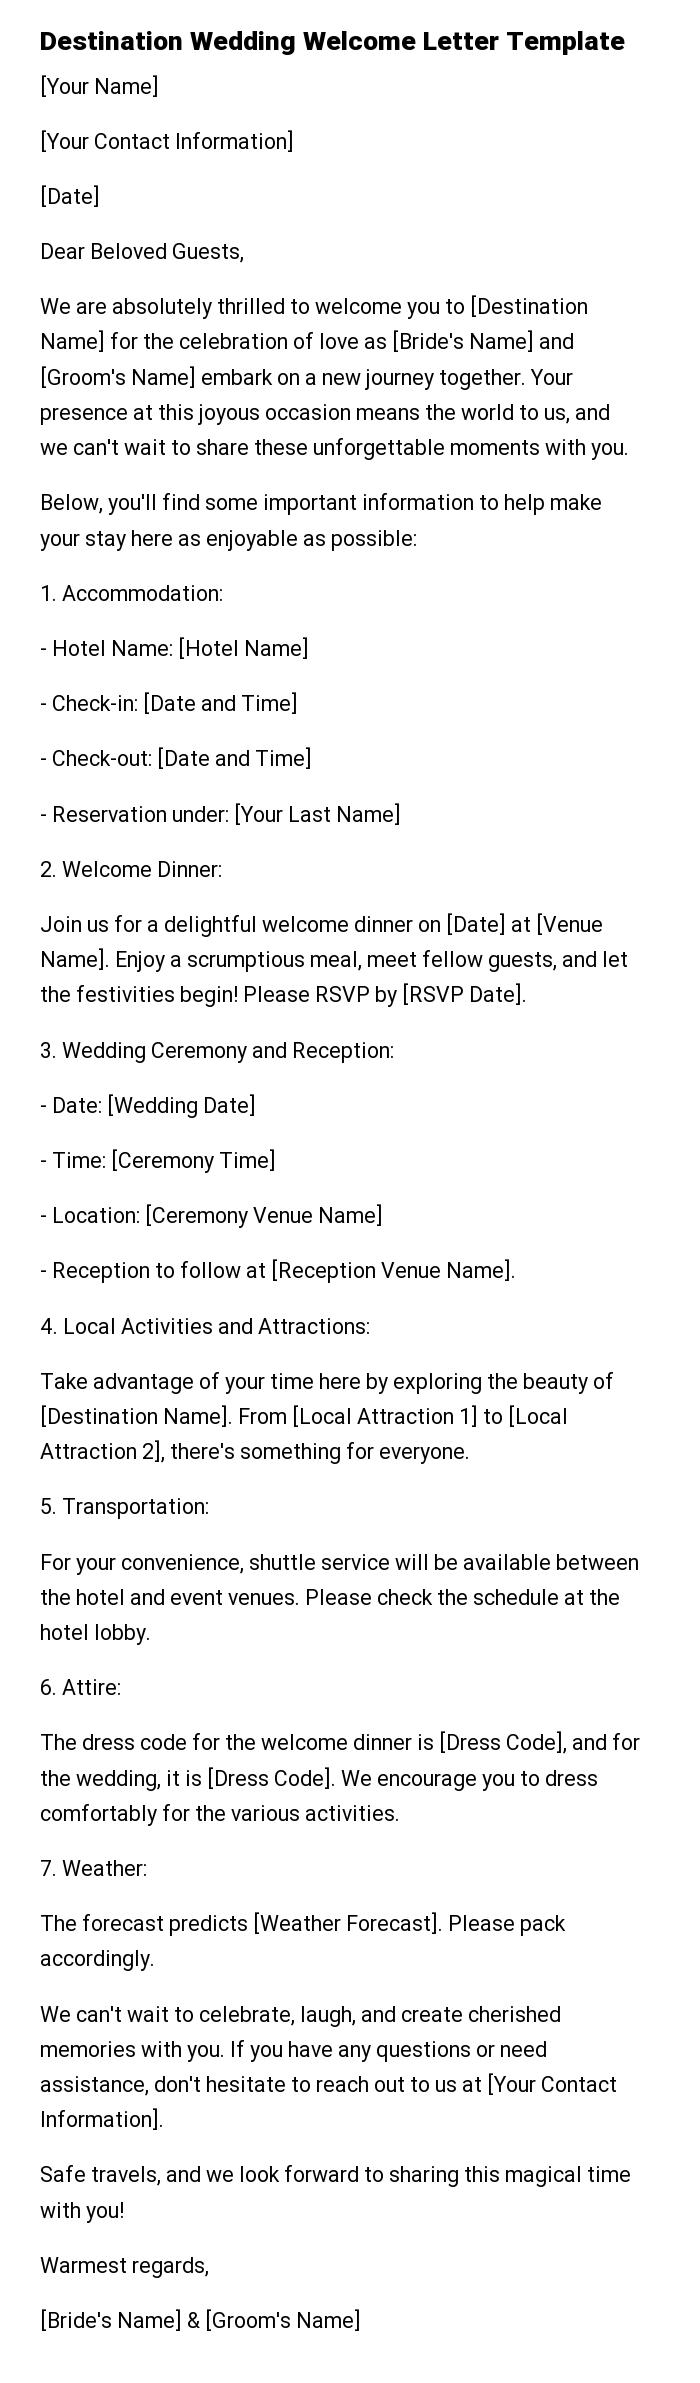 Destination Wedding Welcome Letter Template